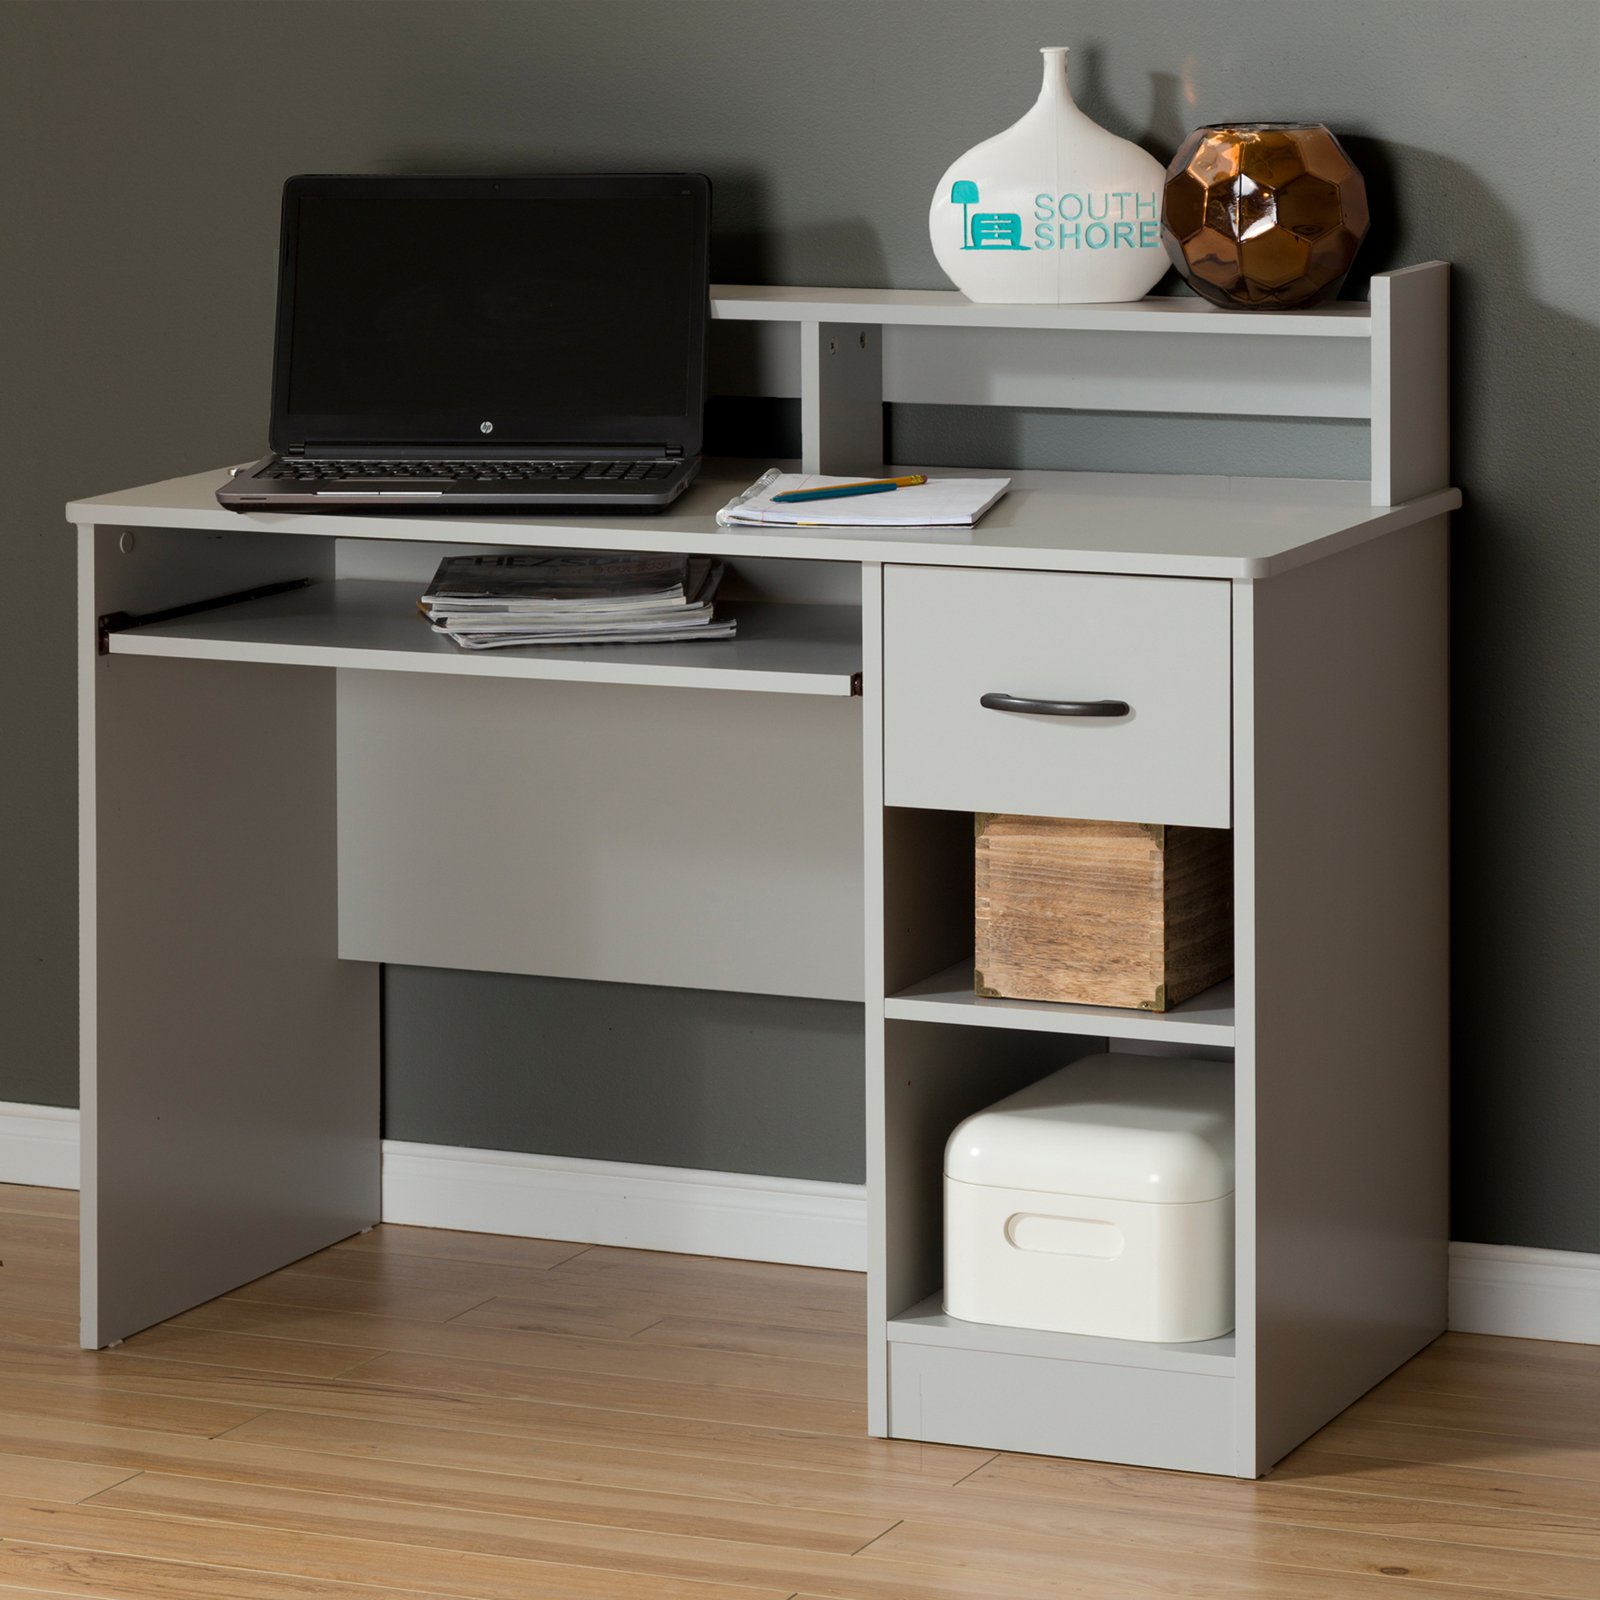 South Shore Smart Basics Small Desk with Keyboard Tray, Multiple Finishes - image 5 of 7